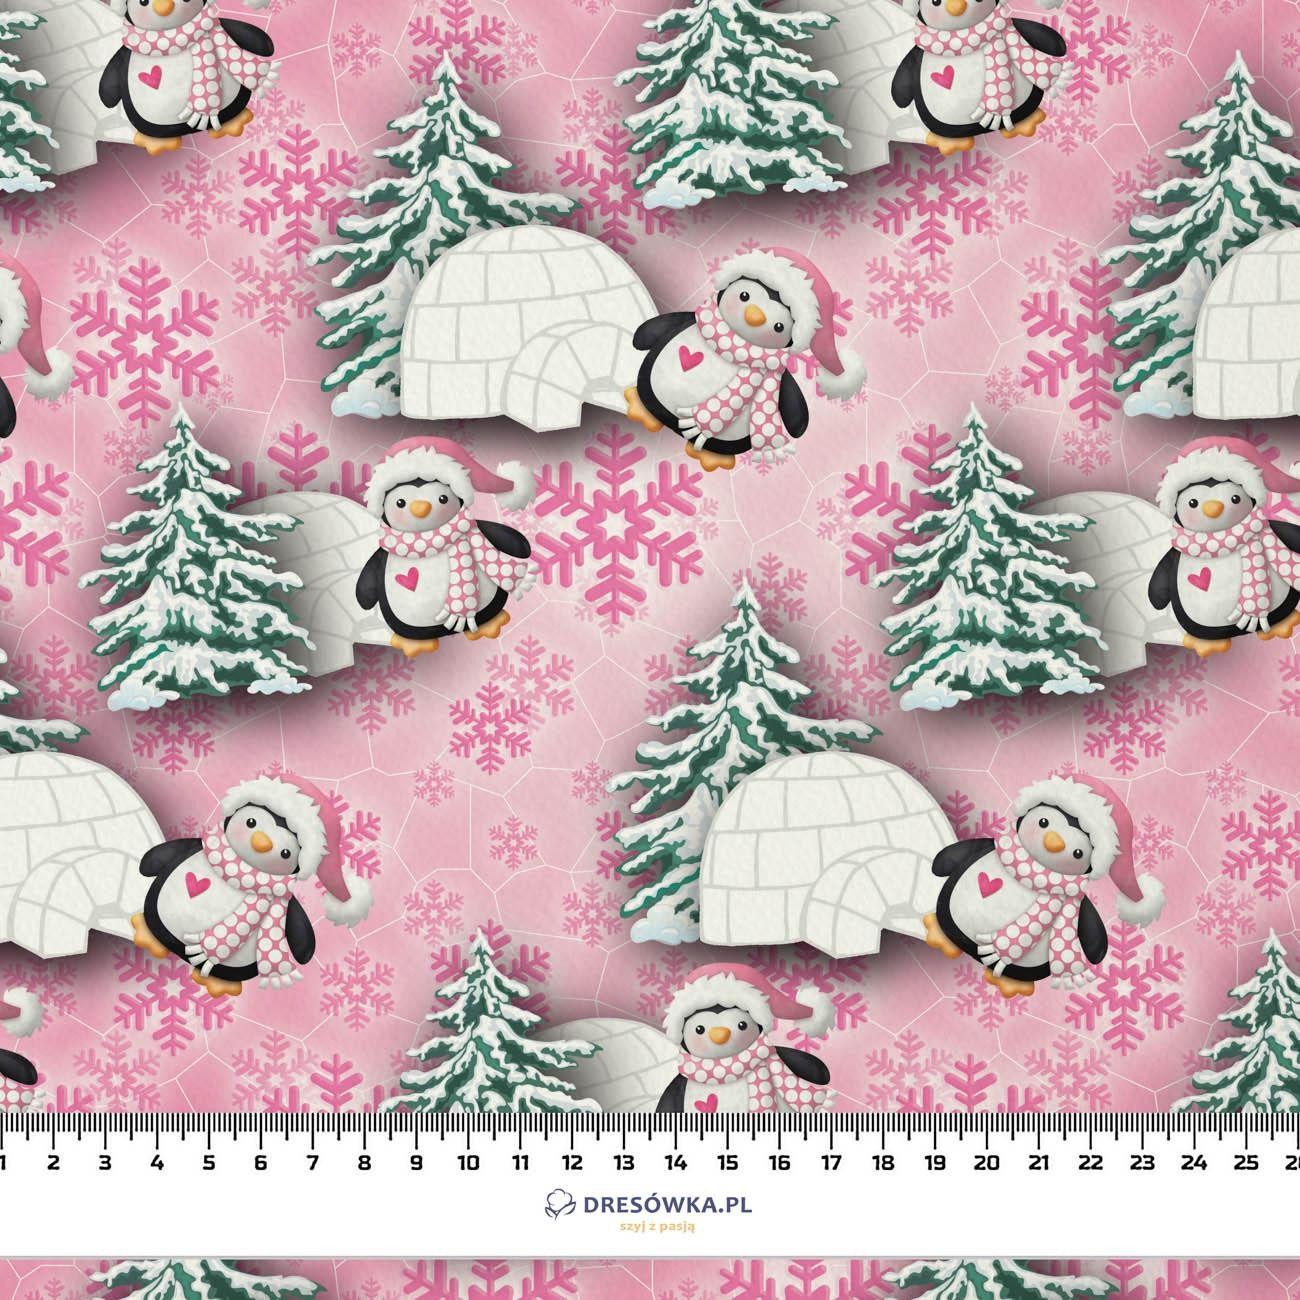 PENGUINS AND IGLOOS (PENGUINS) - Cotton woven fabric